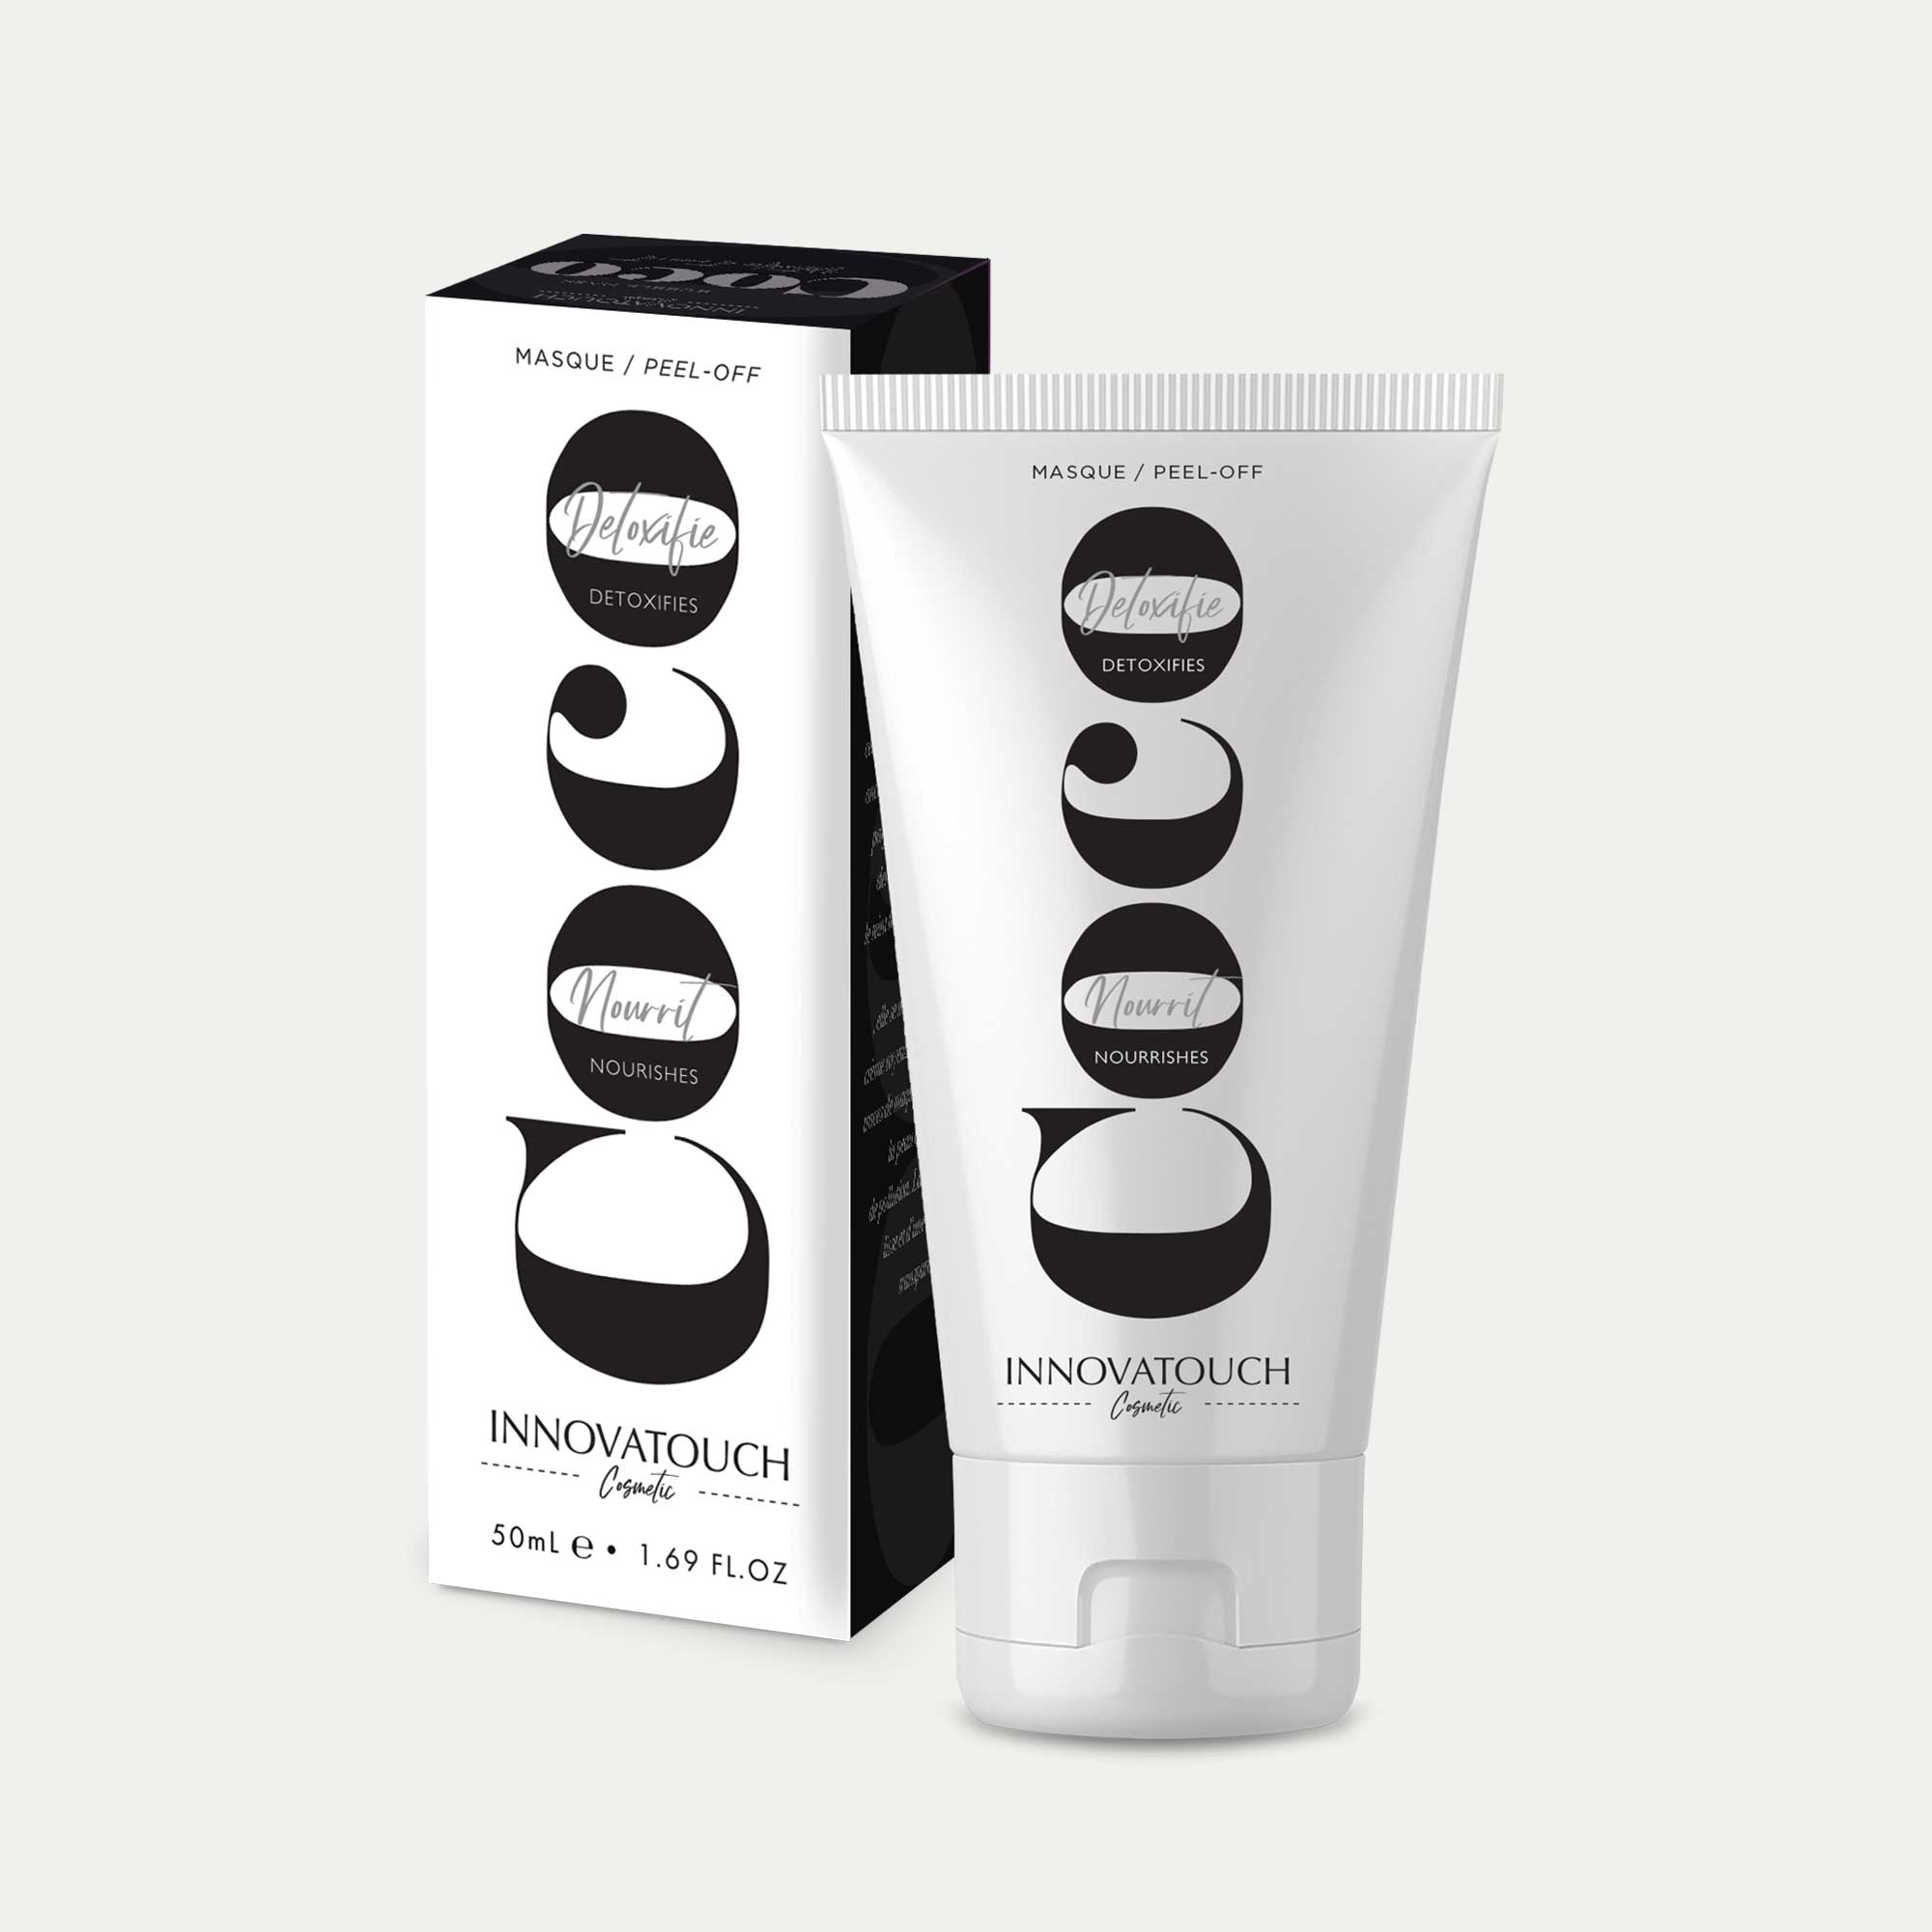 COCO-masque-peel-off-3-innovatouch-cosmetic